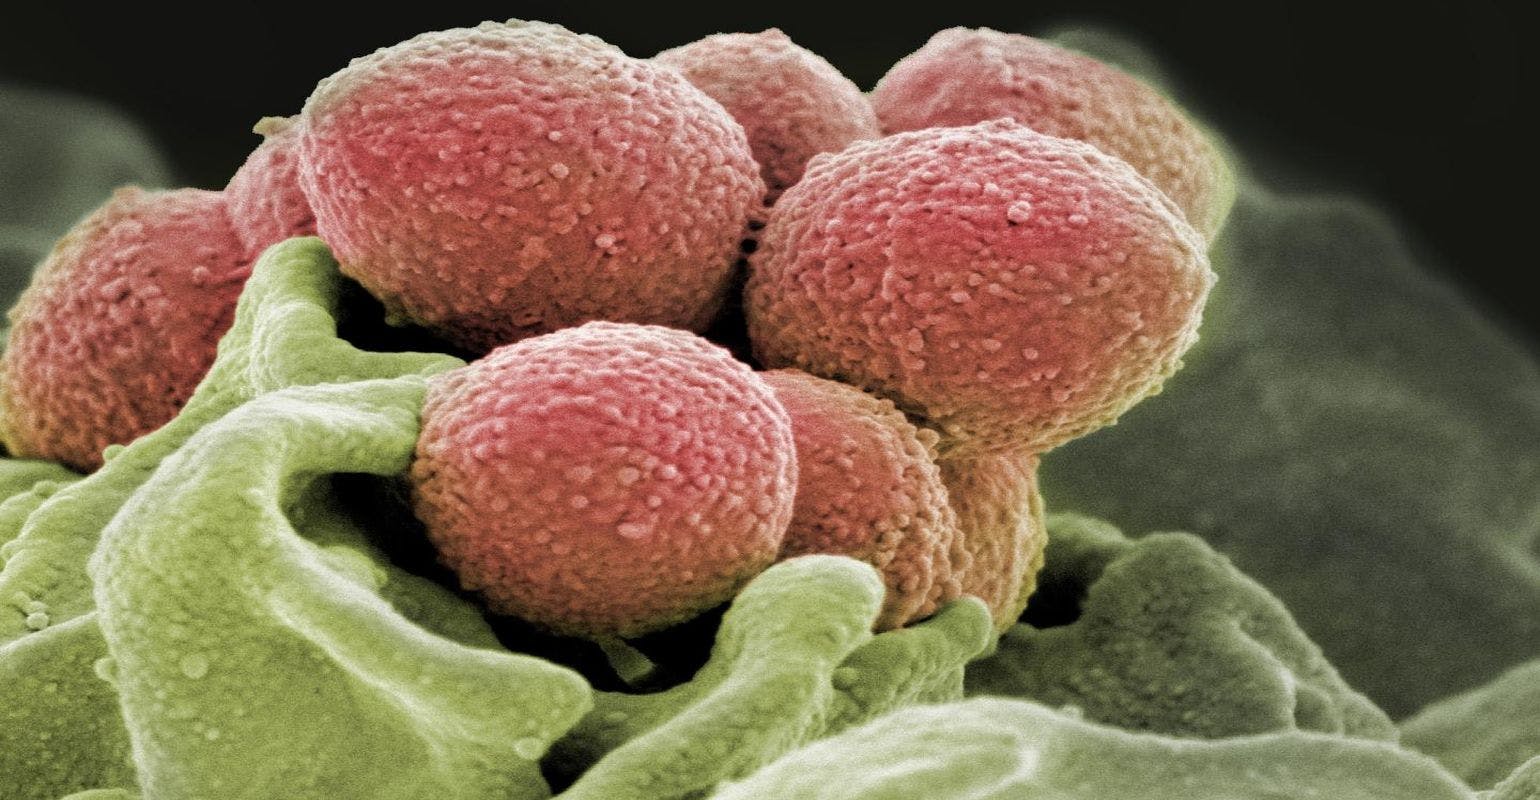 Researchers Find Trigger That Turns Strep Infections Into Flesh-Eating Disease